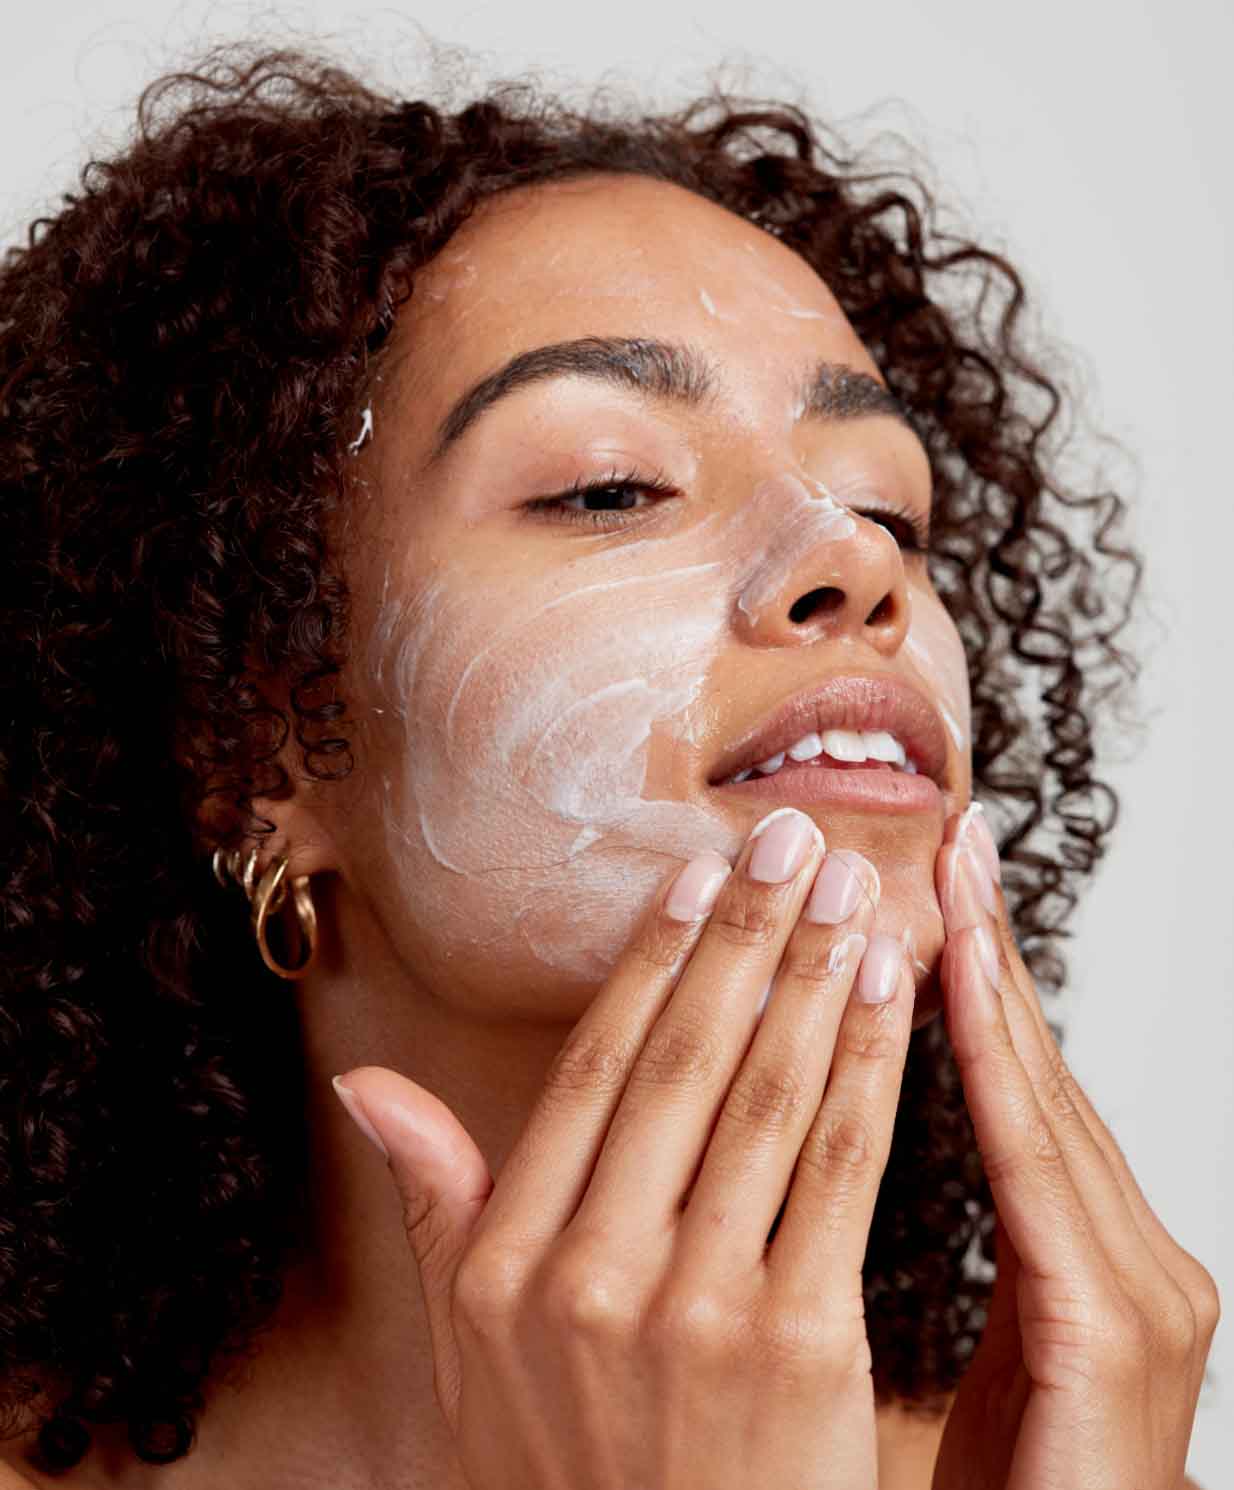 woman using cleanser